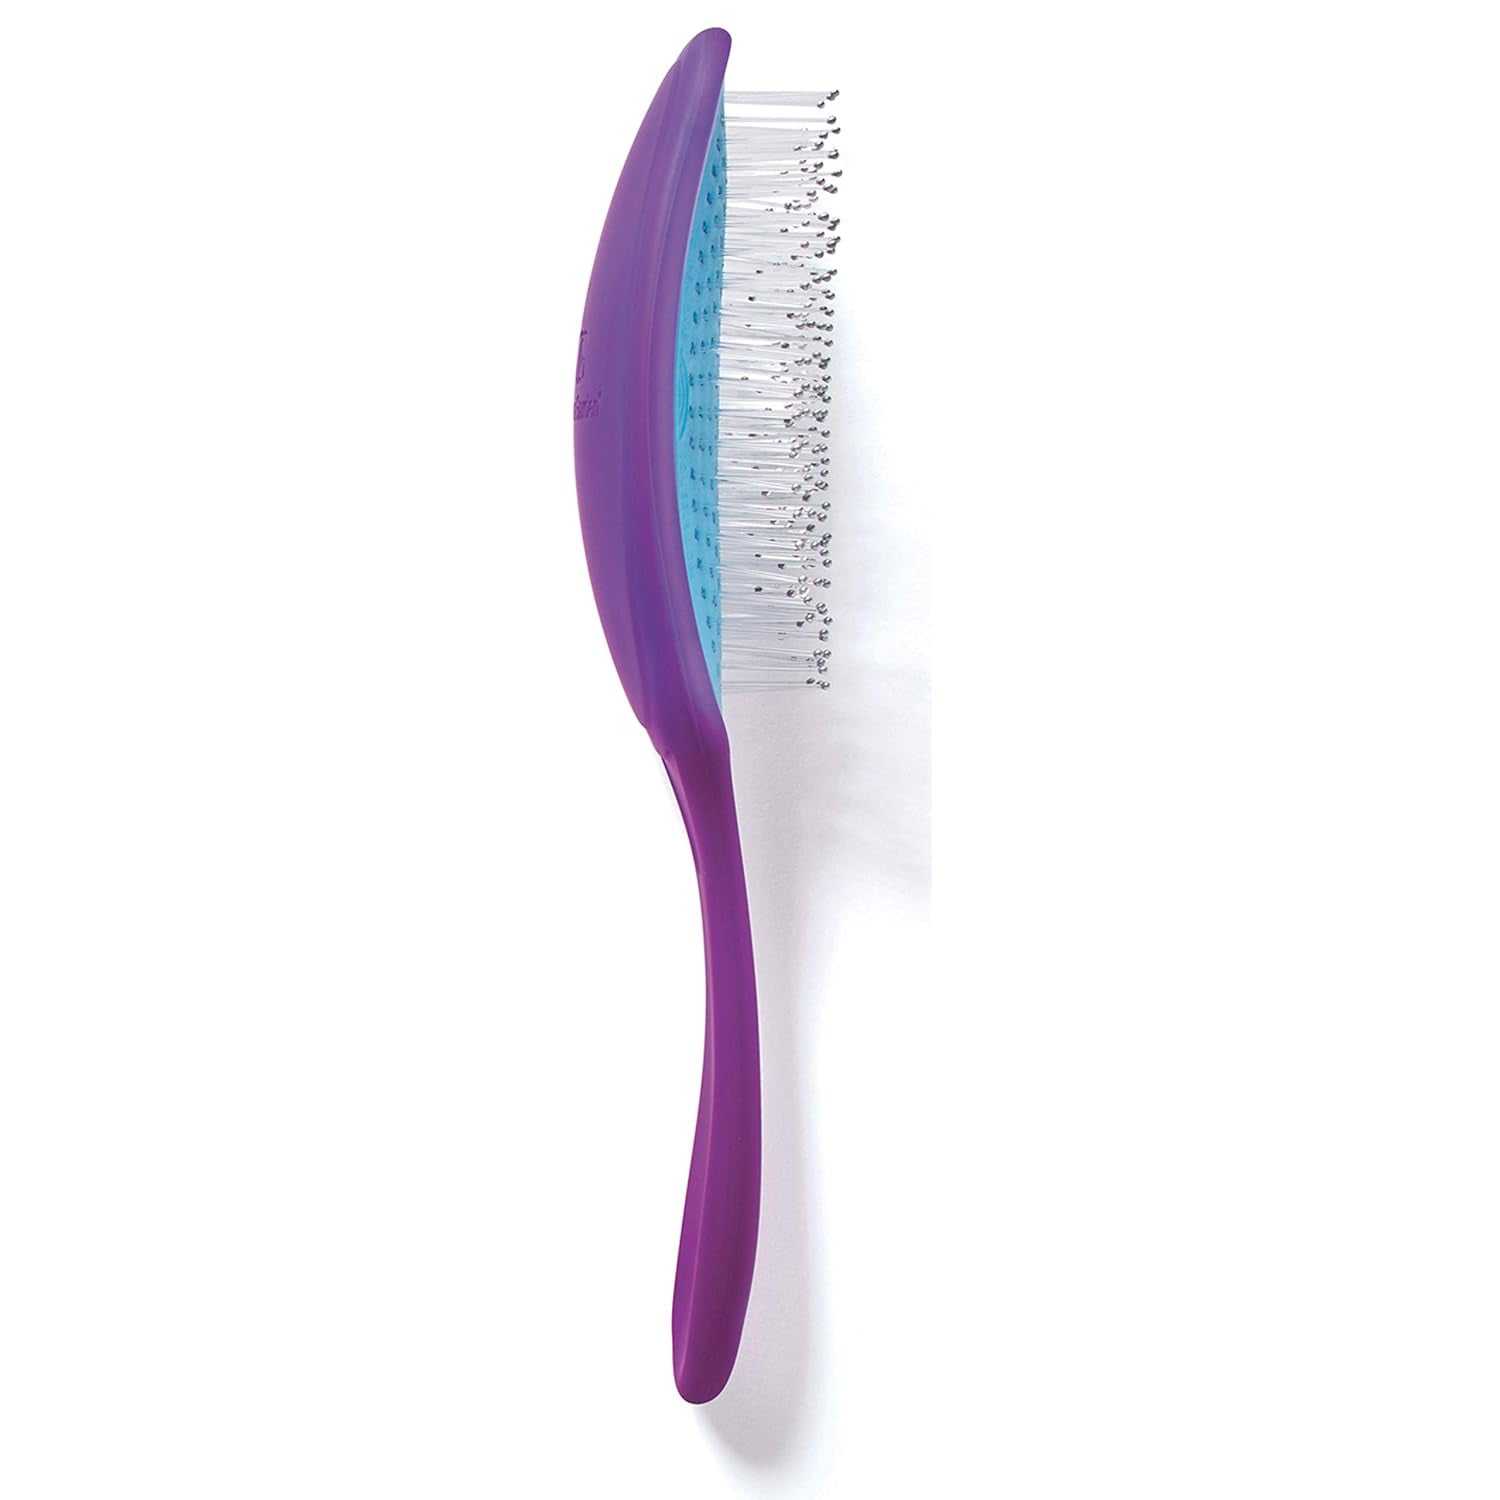 OGD-F01 | Fine to Medium Hair | Scalp-Hugging with Removable Cushion | The OG Brush Collection | OLIVIA GARDEN - SH Salons